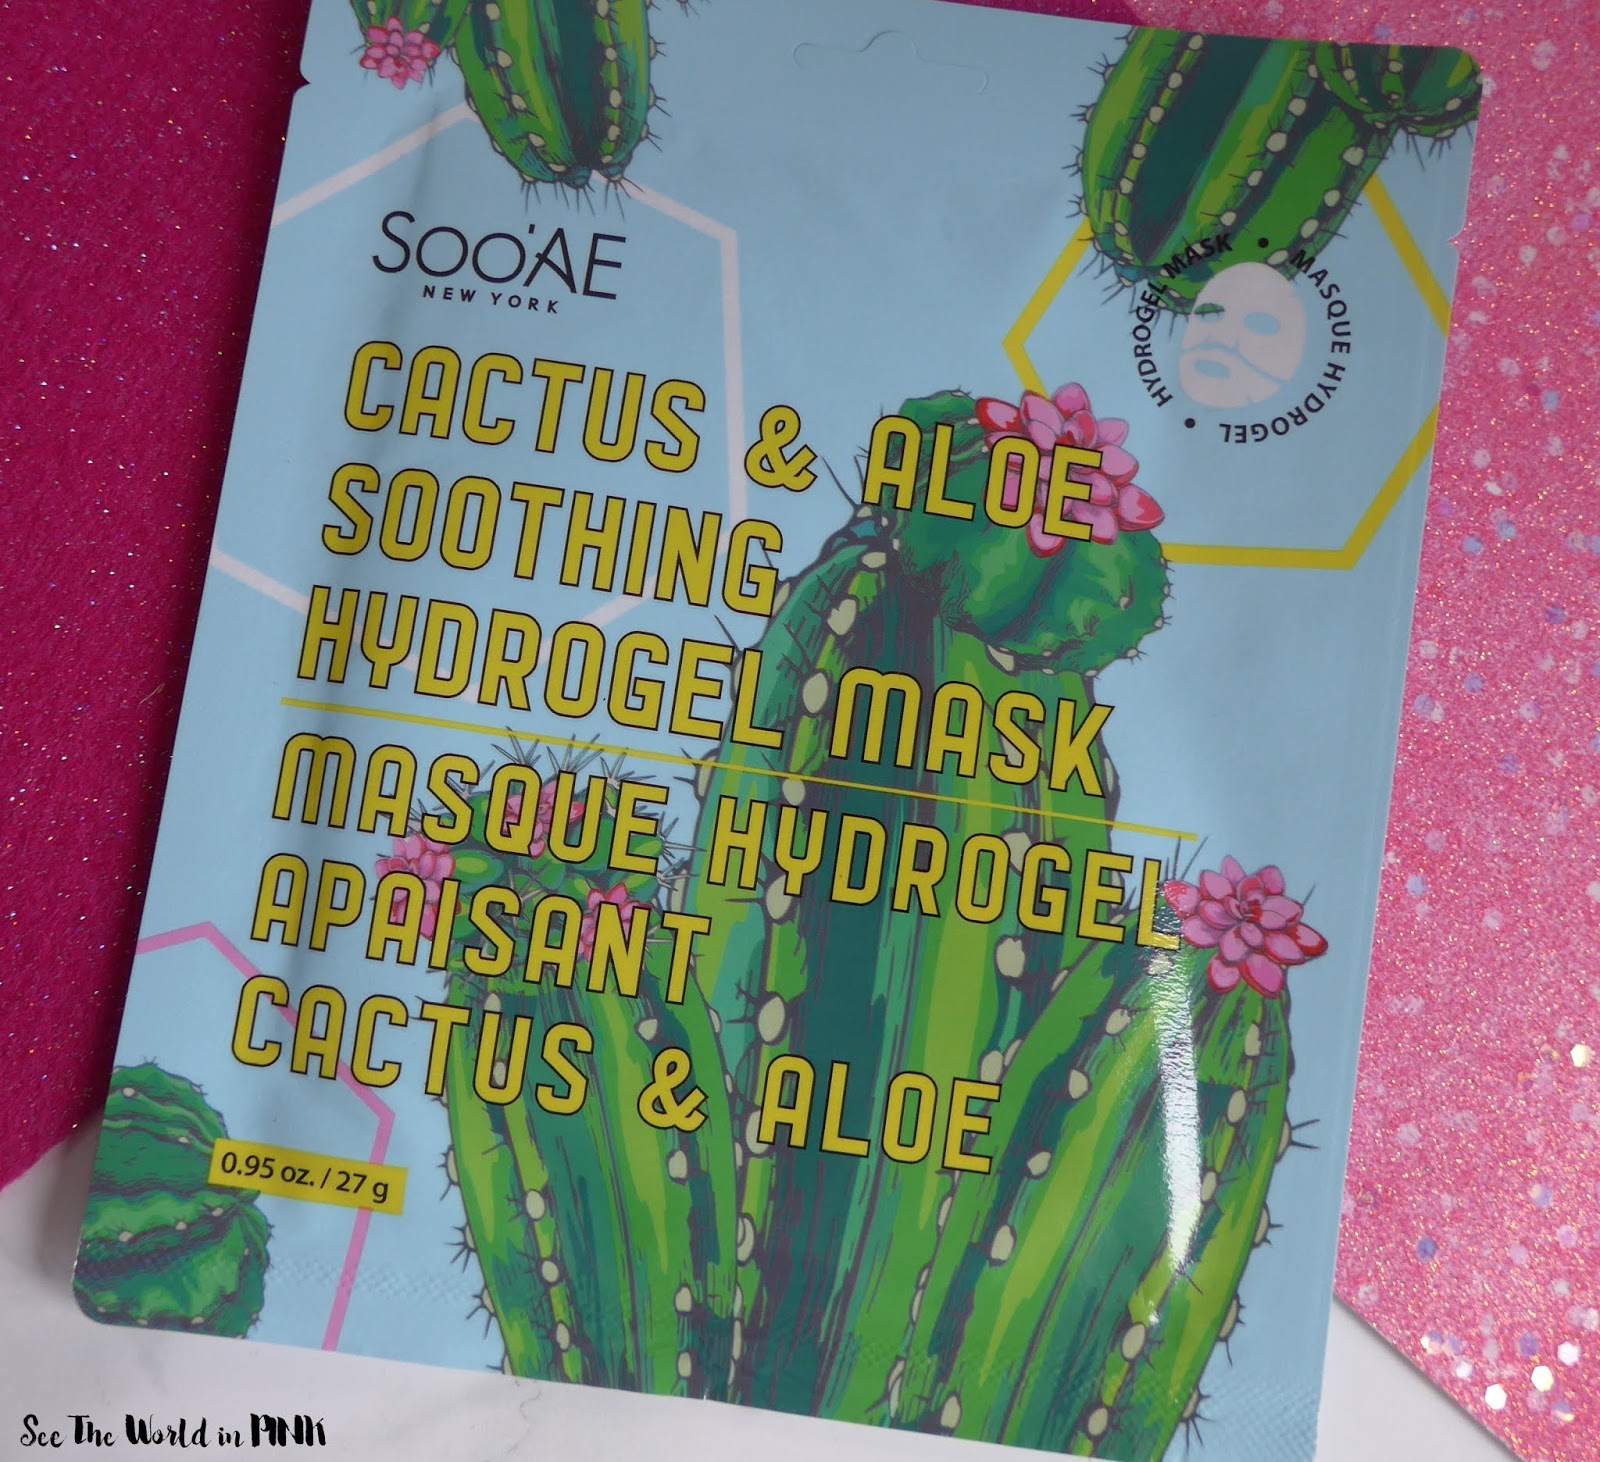 Skincare Sunday Week of Affordable K-Beauty Masks You Can Find at Walmart - SooAE Masks and iN.gredients